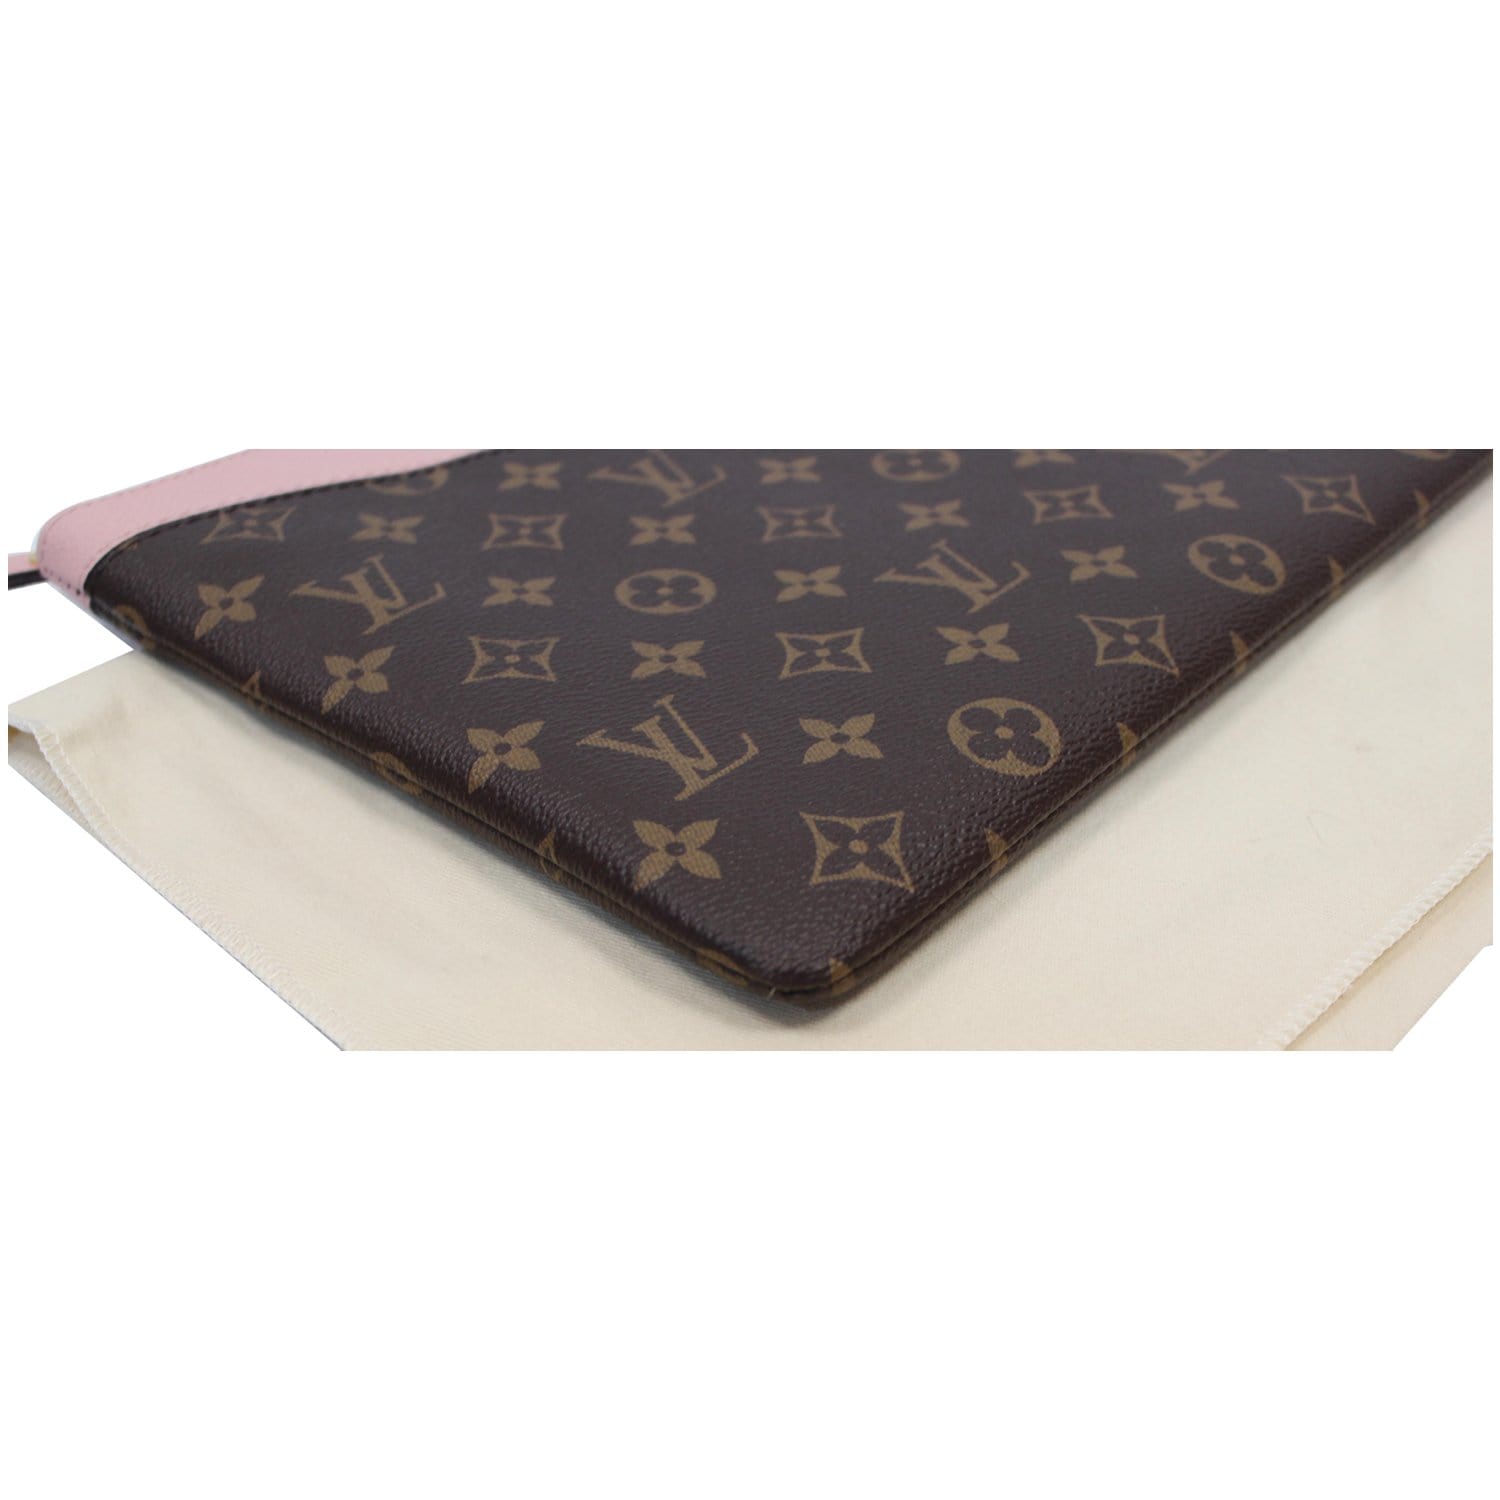 Daily Pouch Monogram Canvas - Wallets and Small Leather Goods